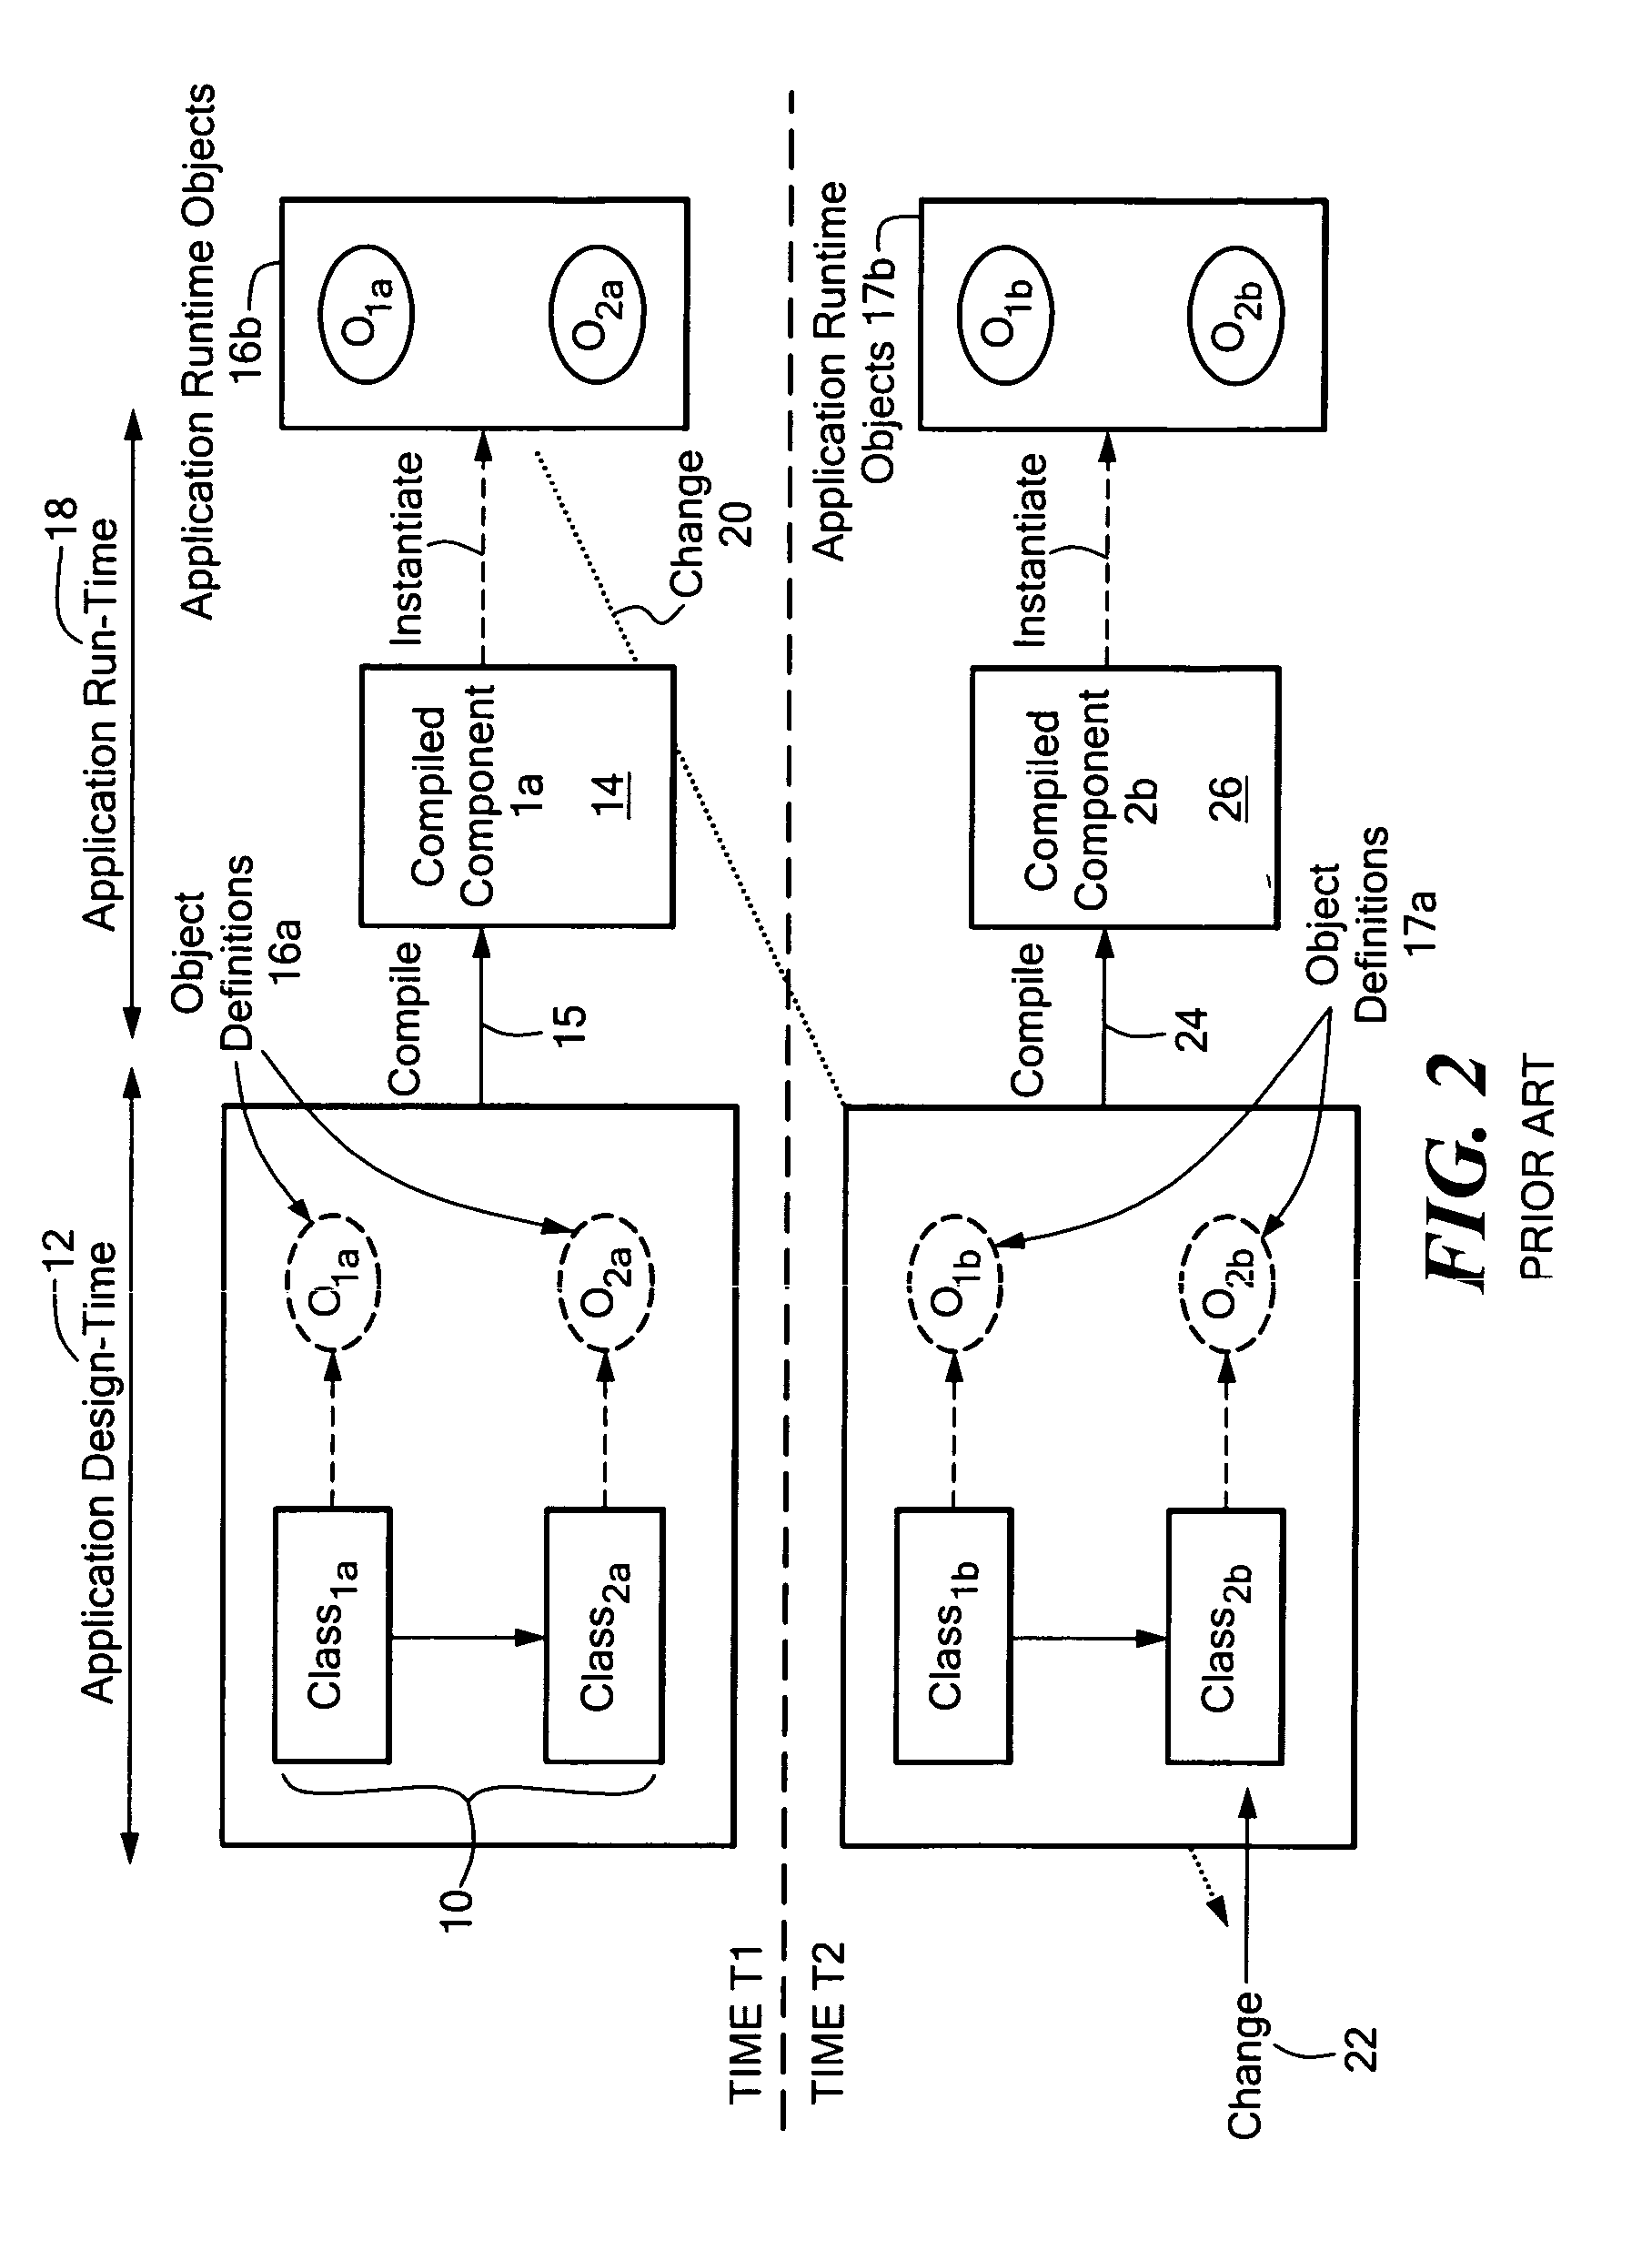 System and method for providing composite applications